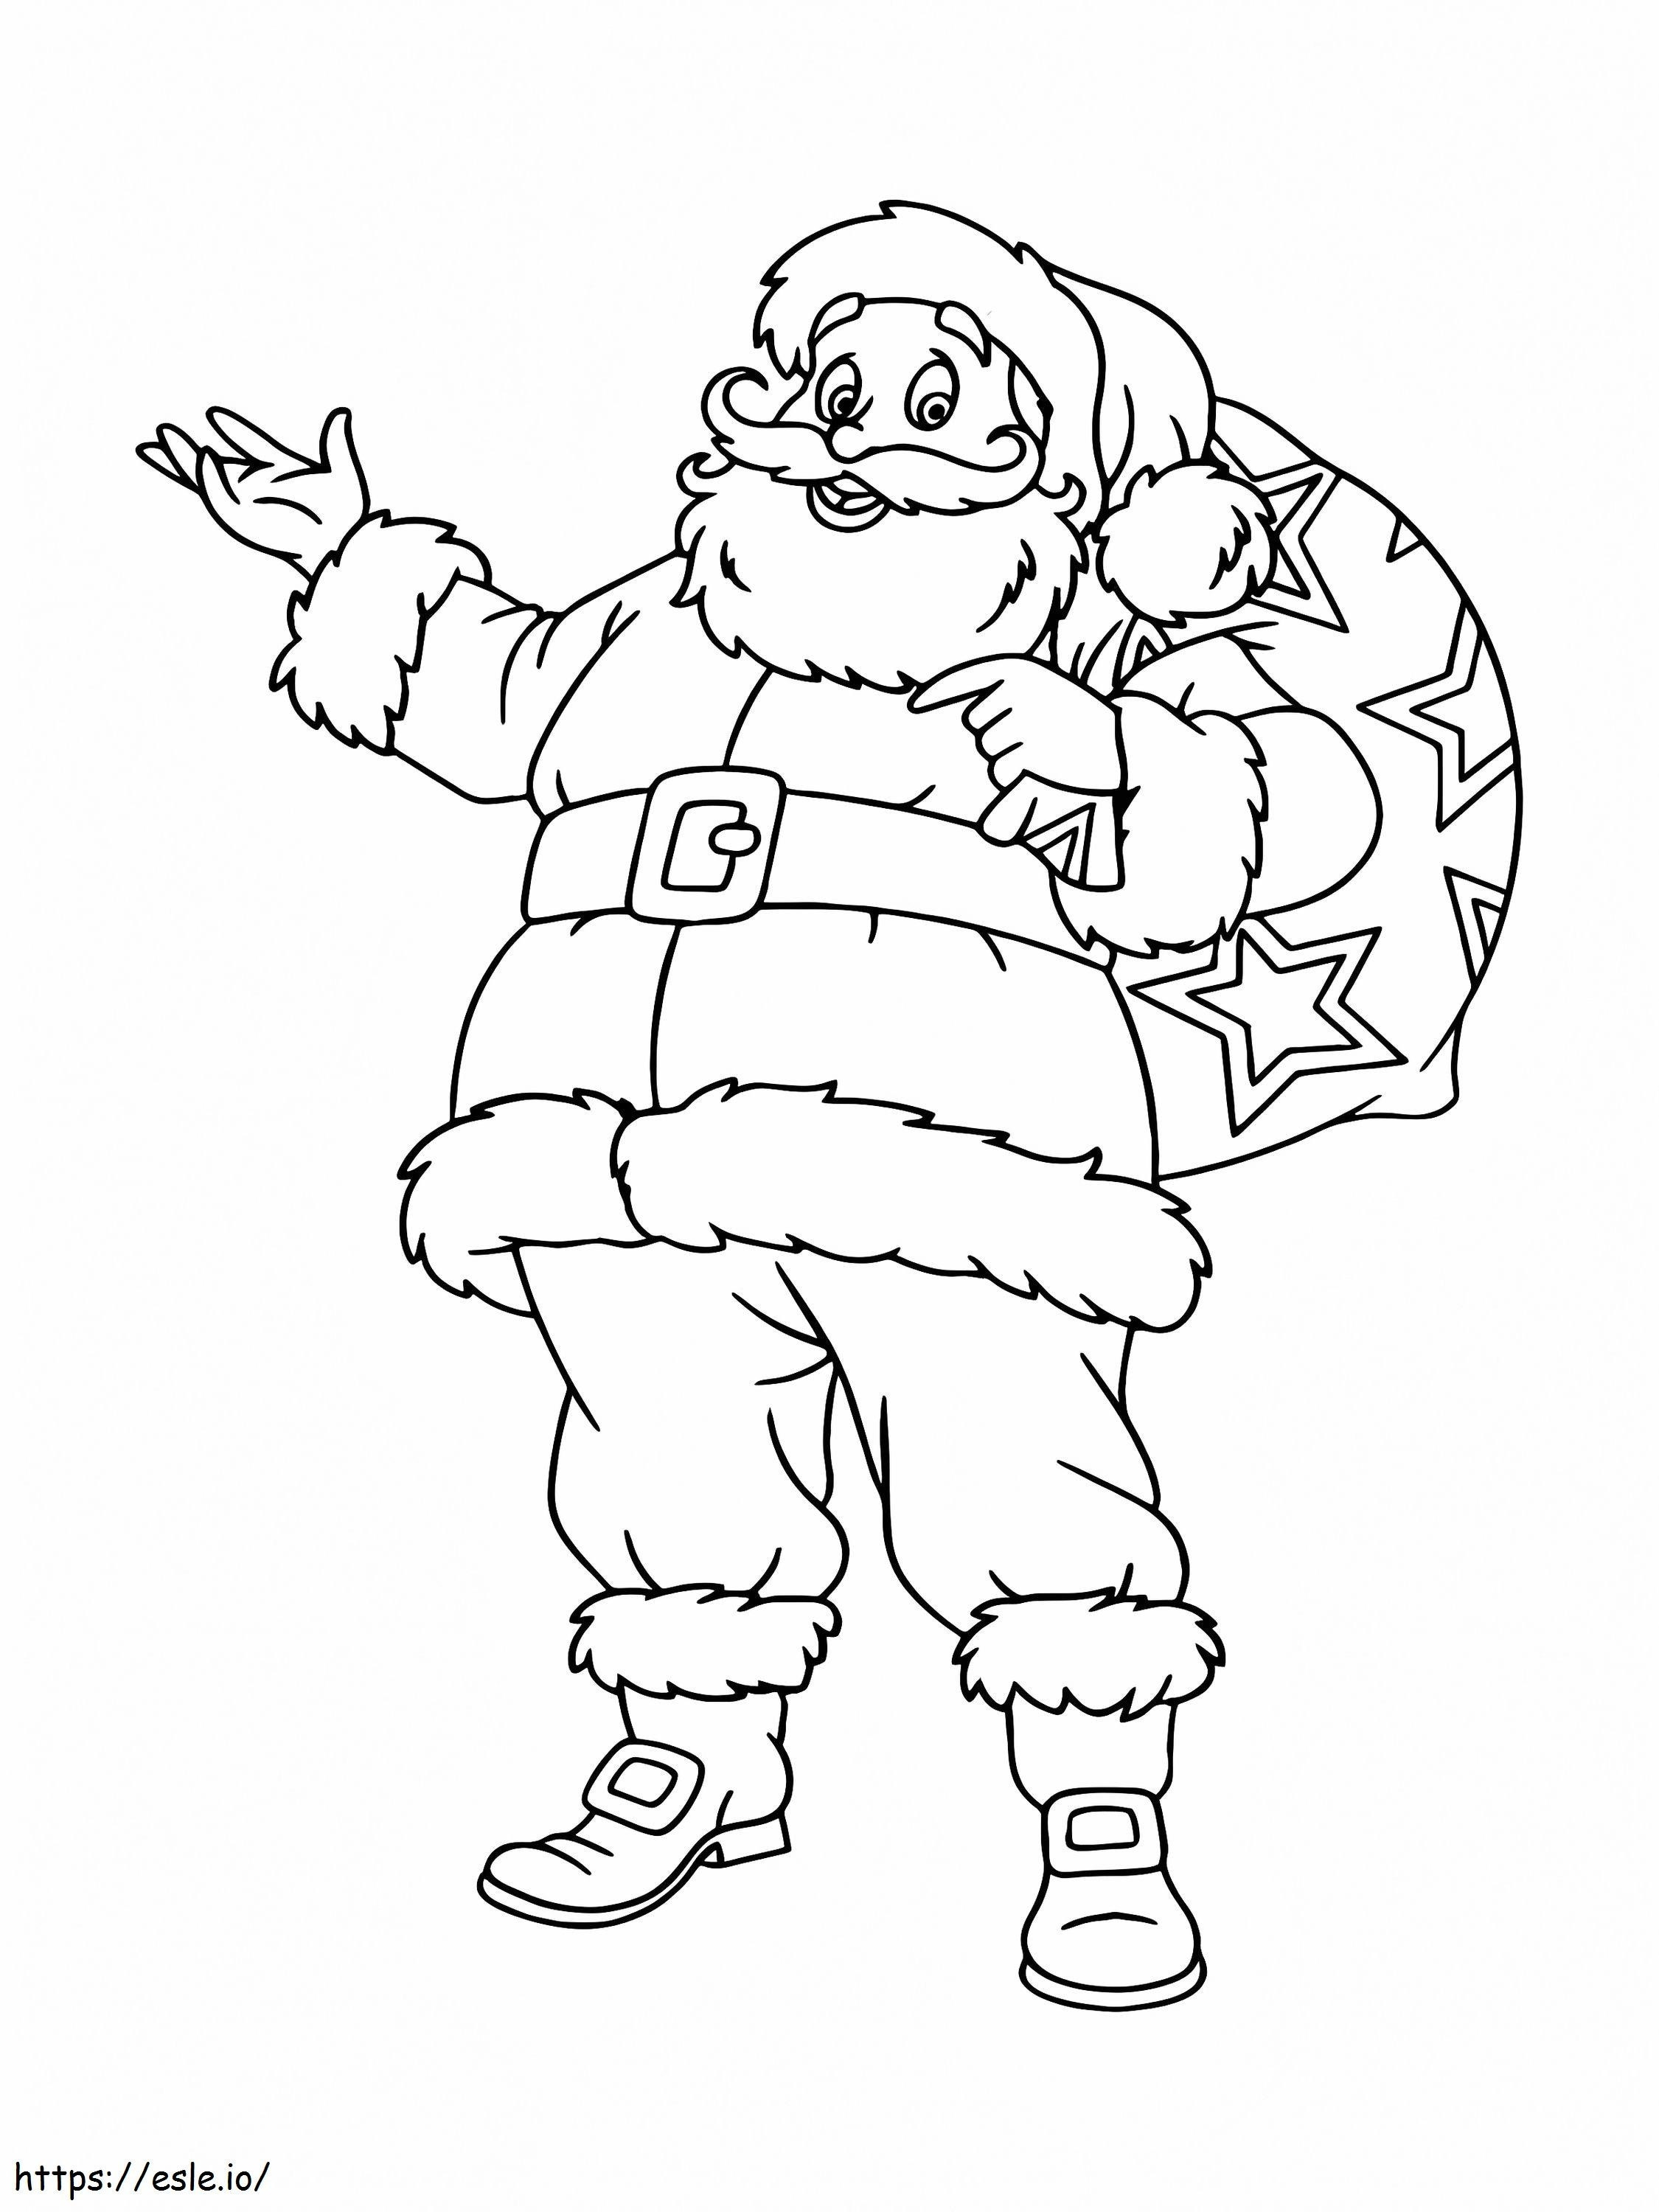 Travelling Santa Claus coloring page